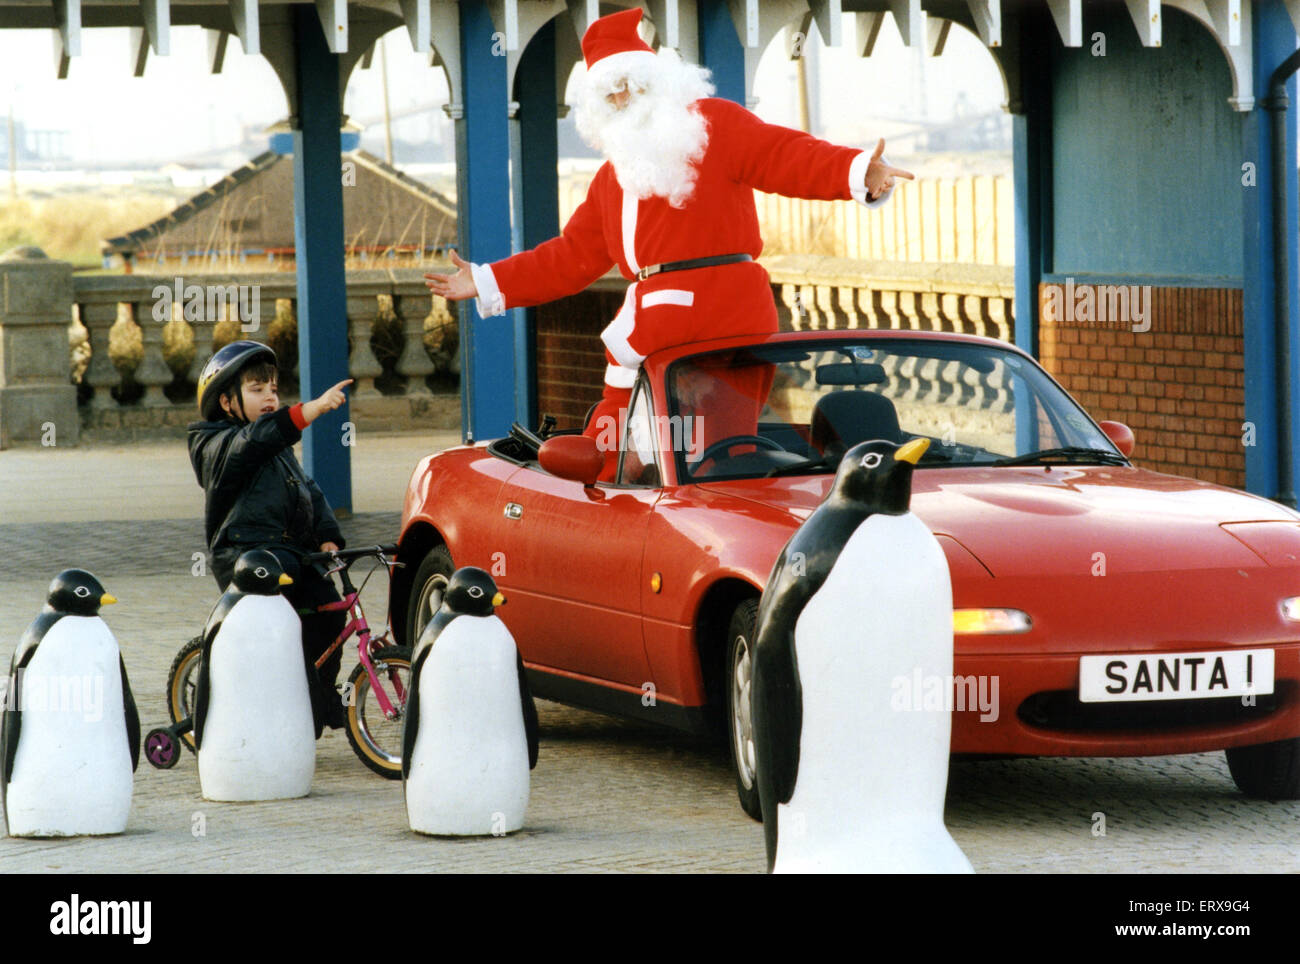 Santa arrived early in Redcar today and needed a little help to find his way home from three year old Stefan taylor. 24th November 1995. Stock Photo